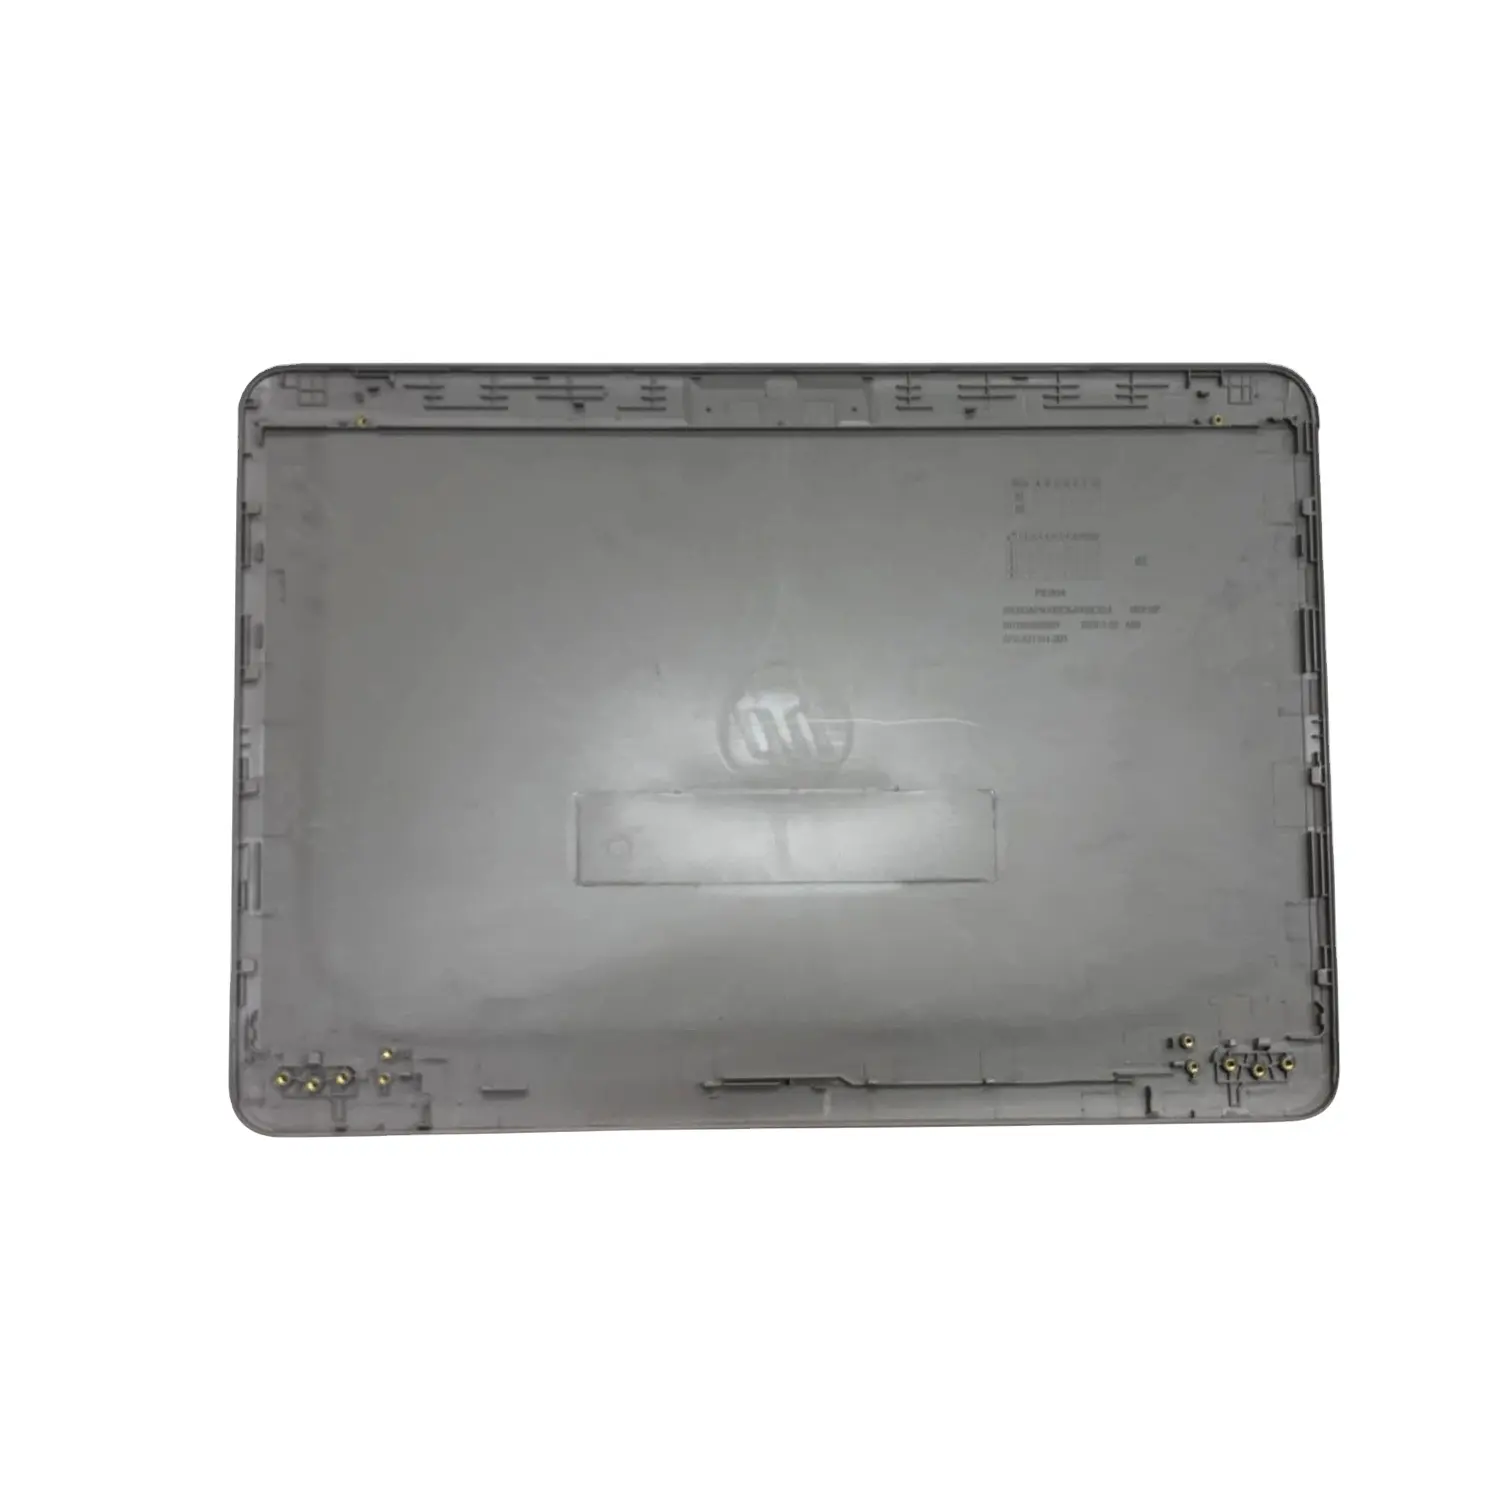 Replacement Laptop ABCD Cover for HP Elitebook 840 G3 LCD Back Lid Cover Front Screen Bezel Palmrest Top Case Bottom Case